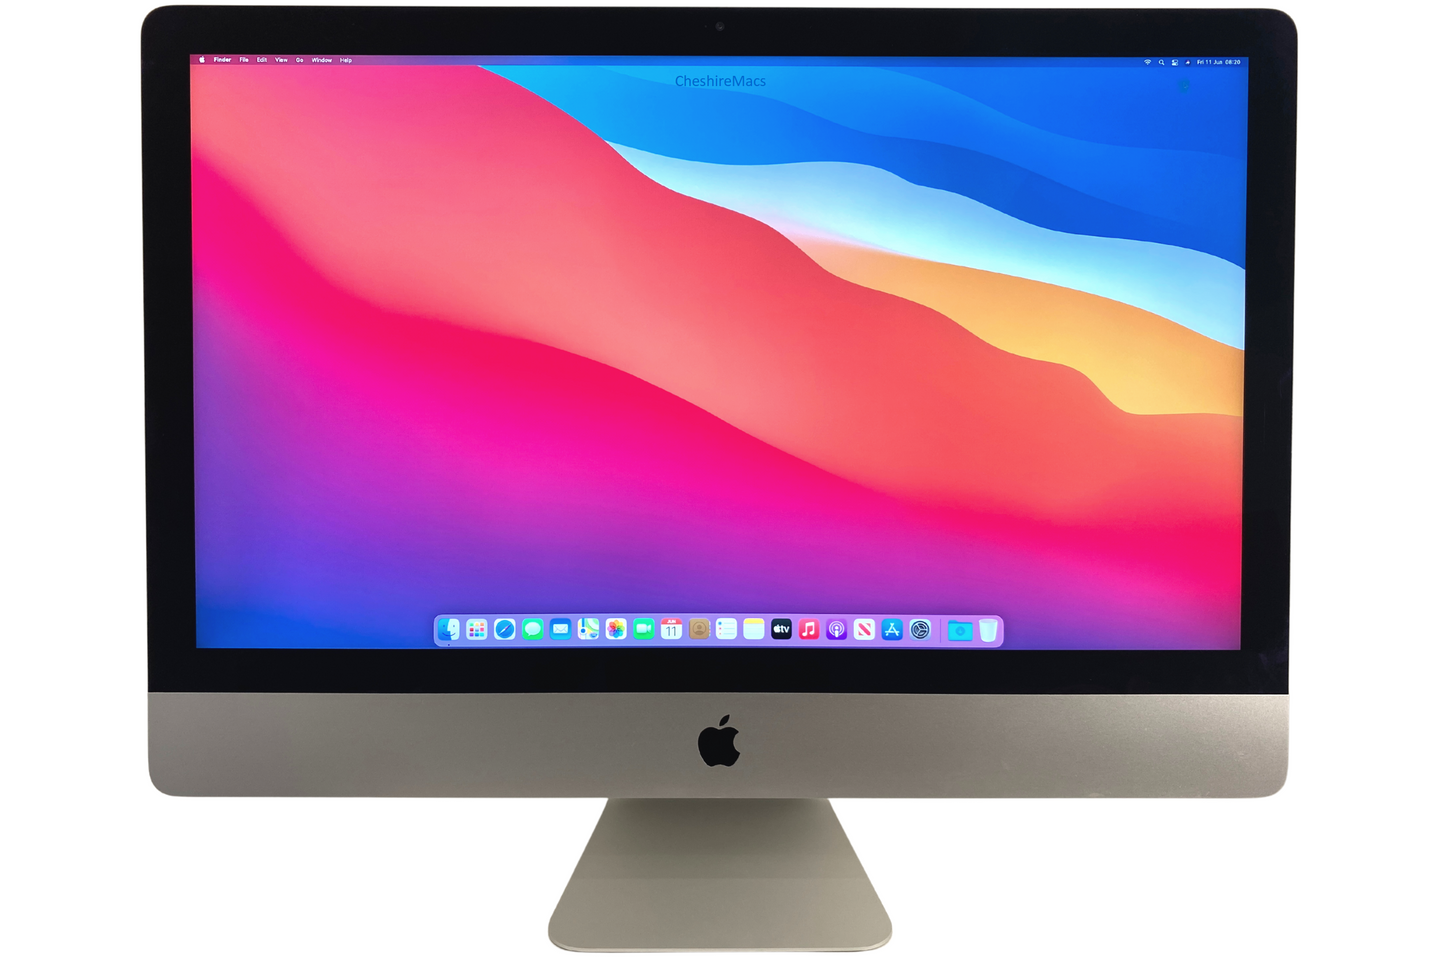 iMac 27 inch Quad-Core i5 3.2Ghz, 16gb, 500GB Solid State Drive (Late 2013)